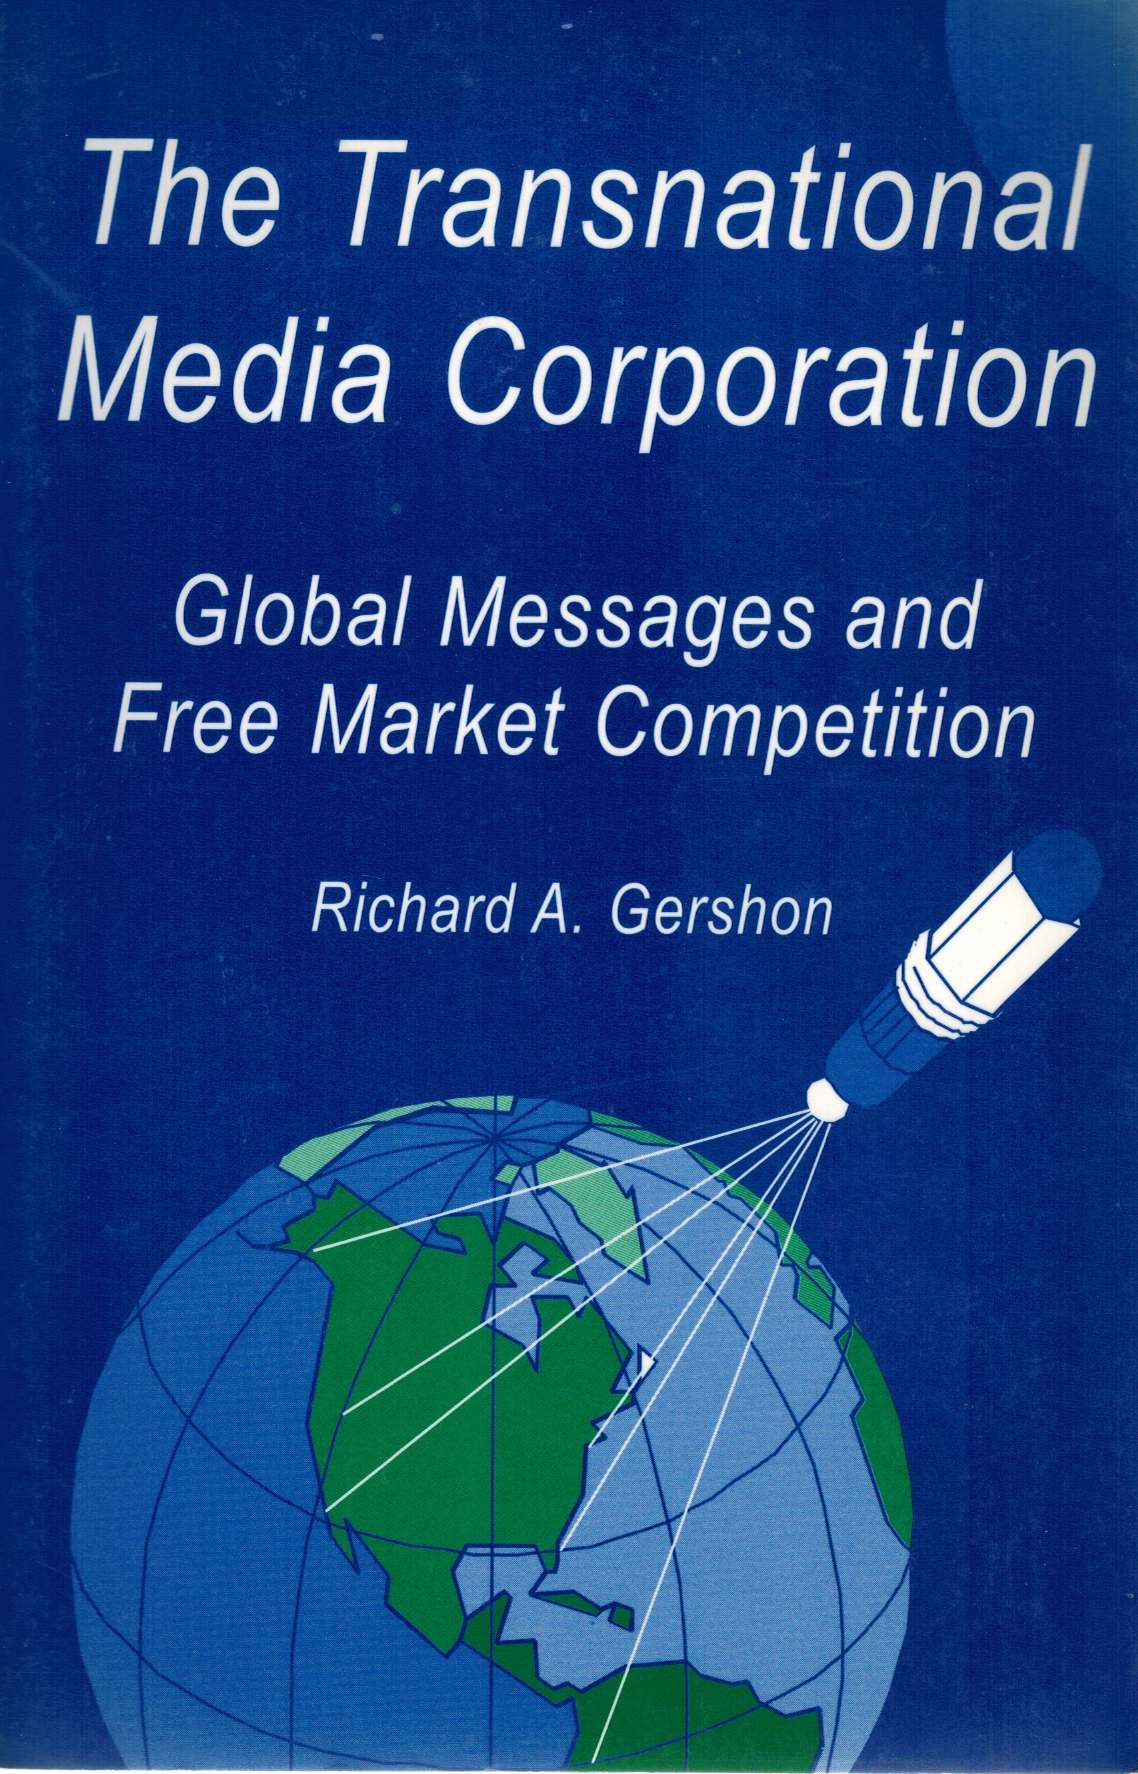 The Transnational Media Corporation: Global Messages & Free Market Competition